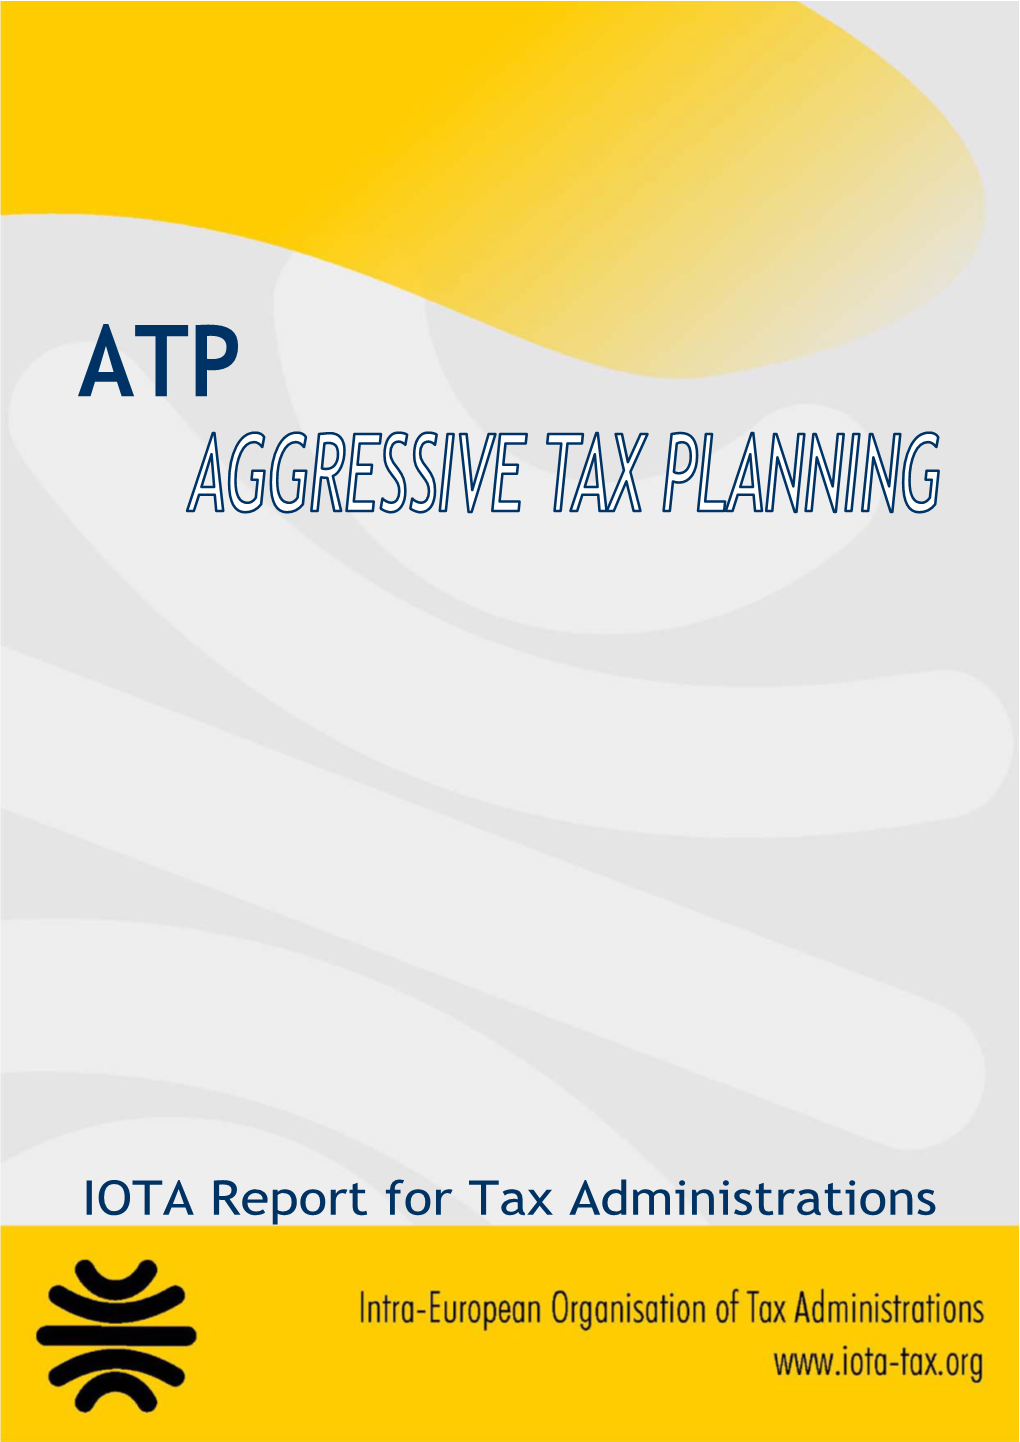 IOTA Report for Tax Administrations – ATP – Aggressive Tax Planning